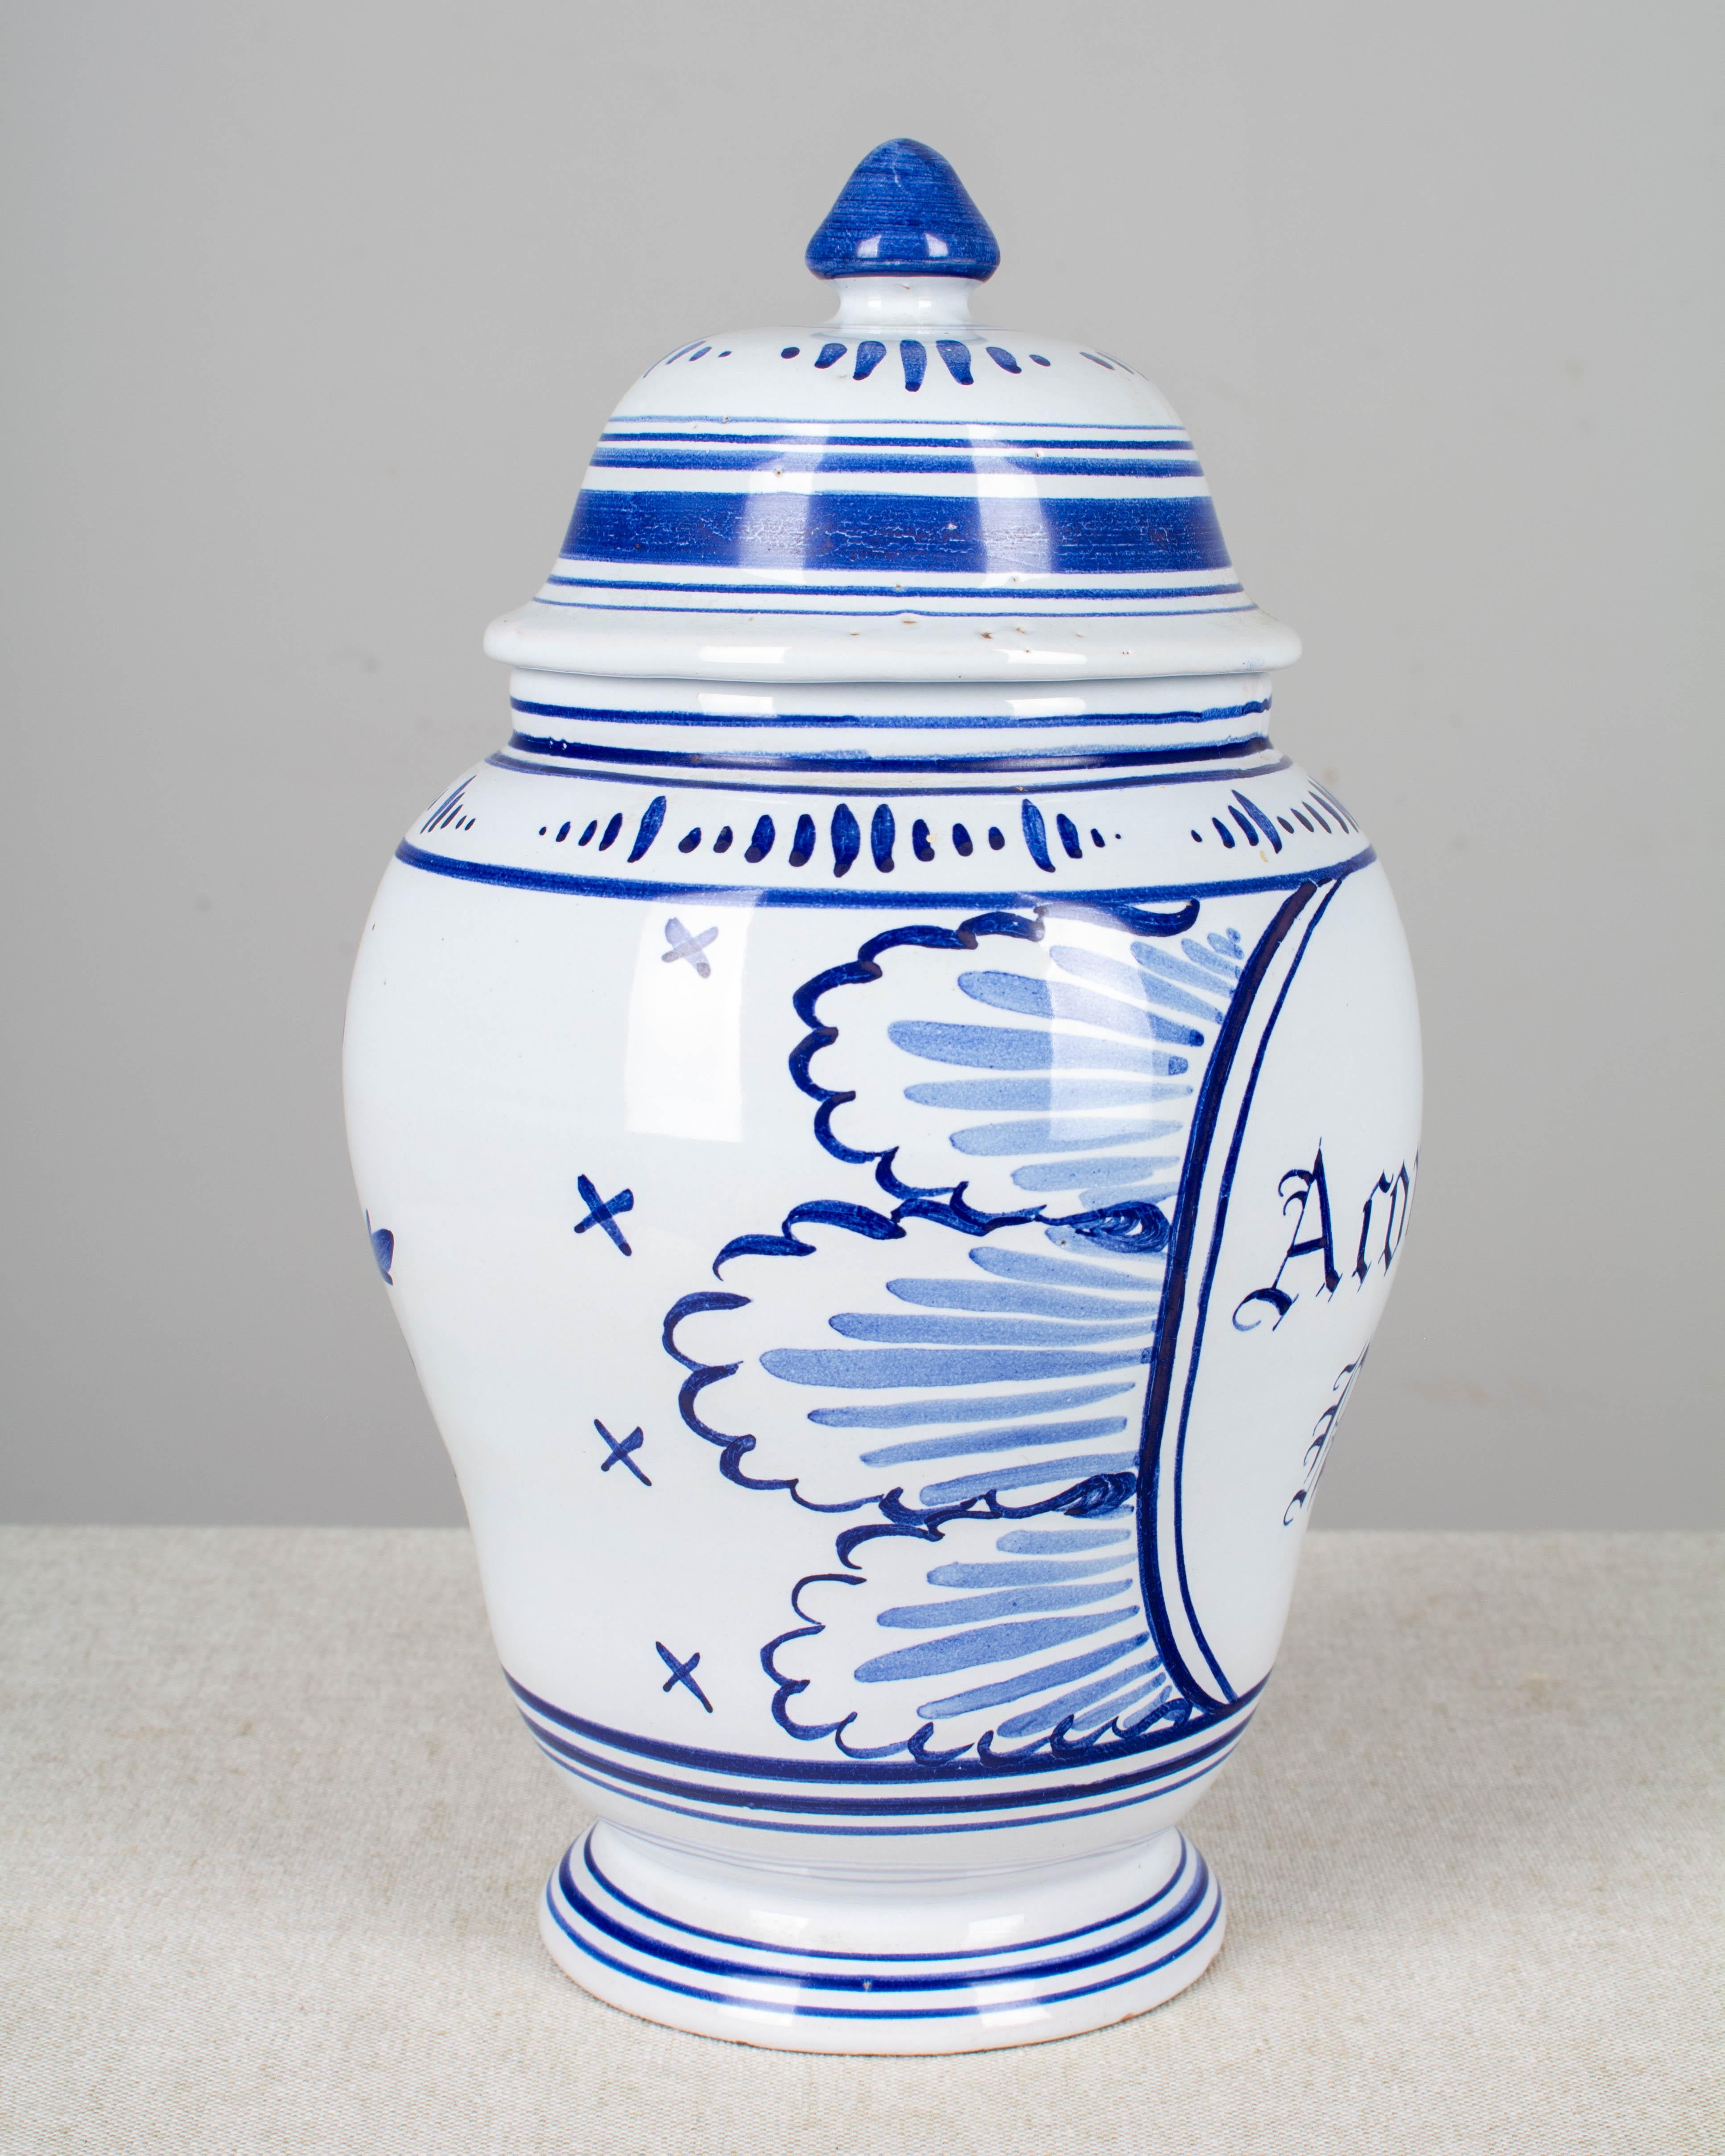 Ceramic Delft Faience Apothecary Jar For Sale